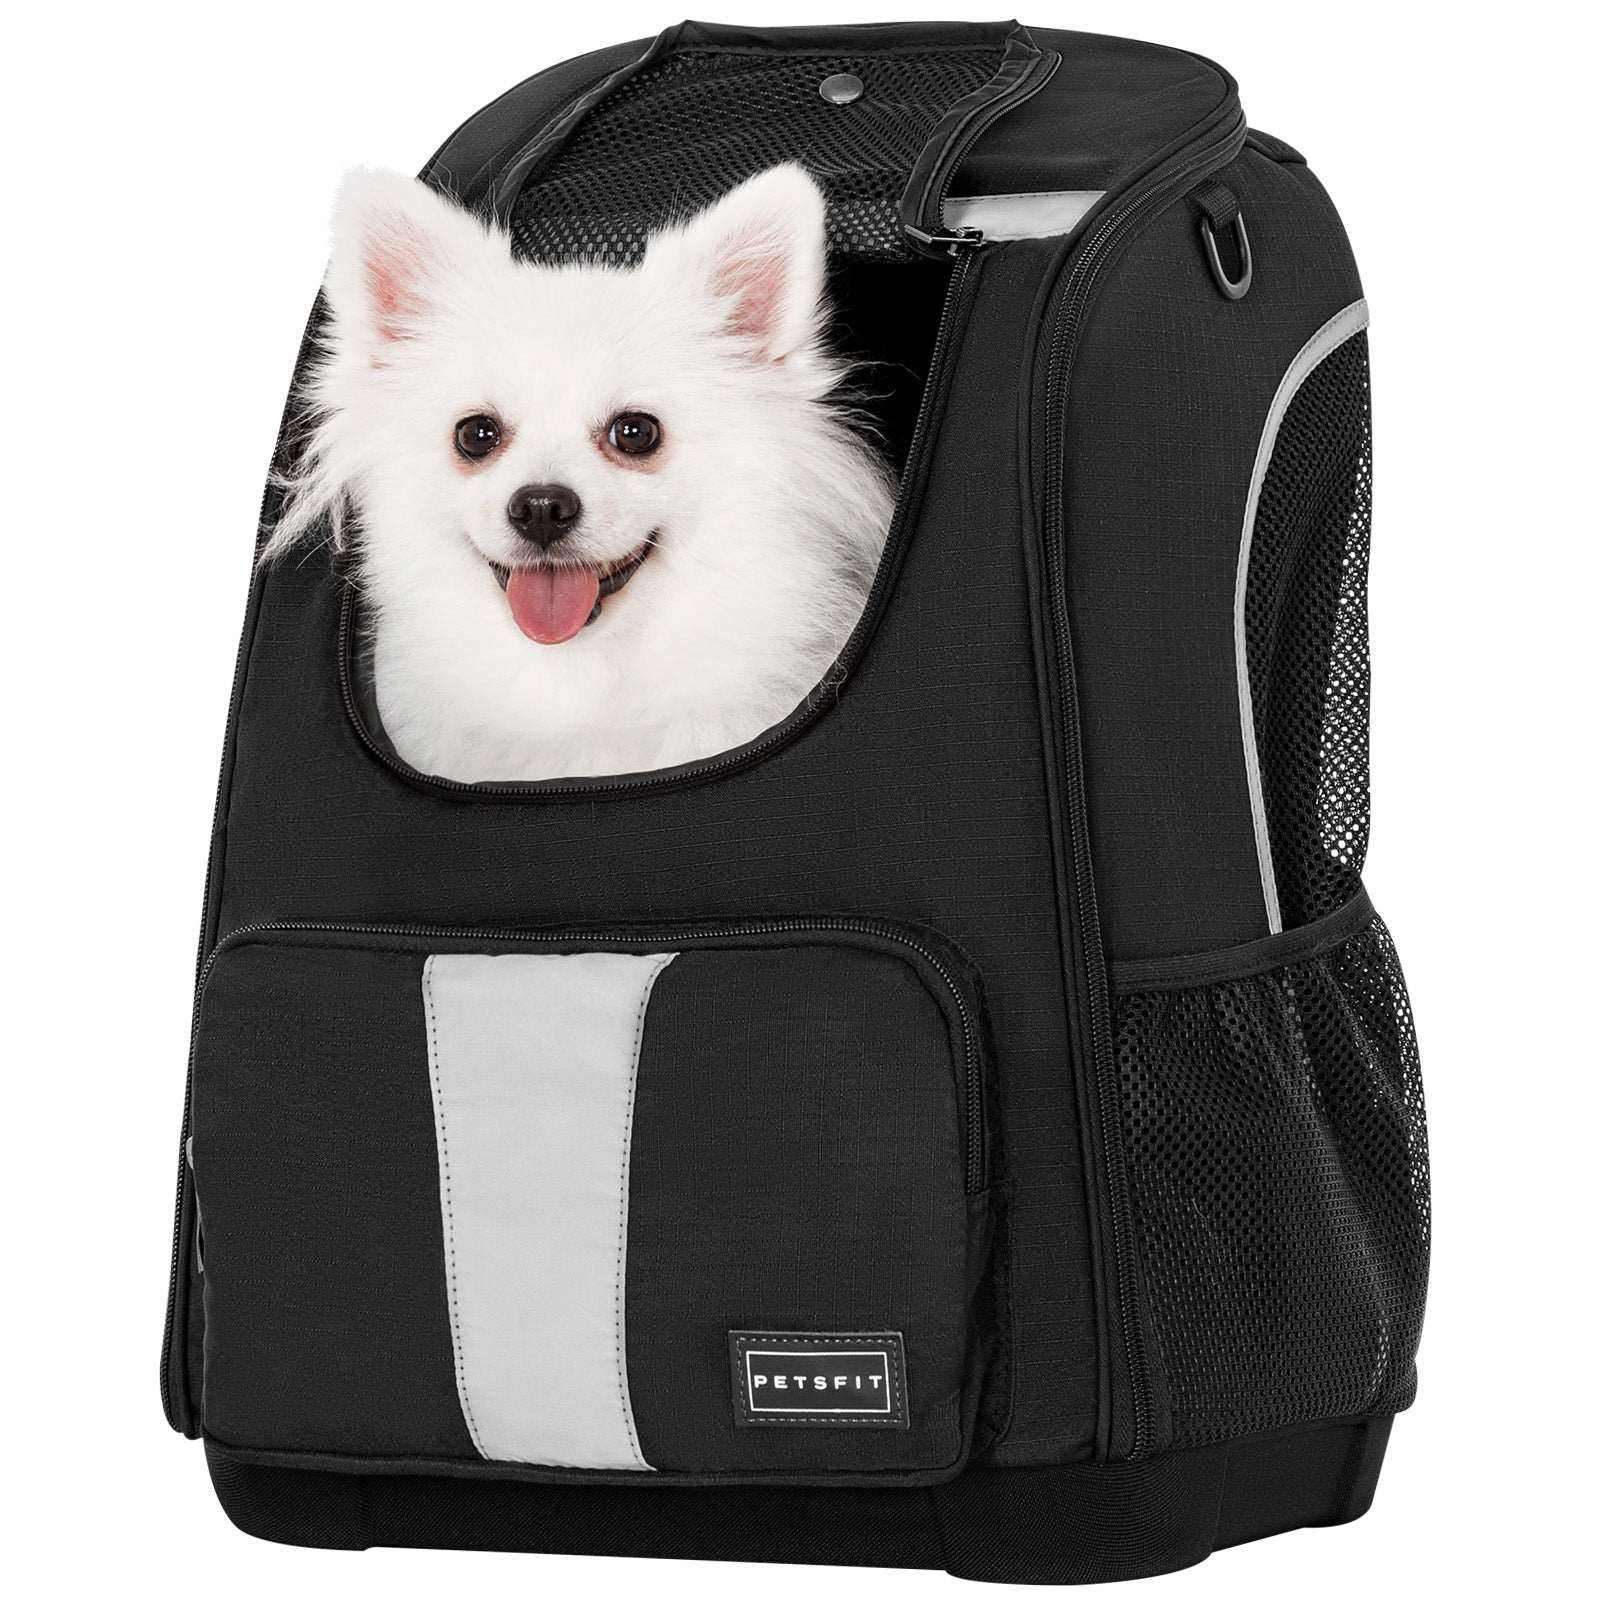 Petsfit-Pet-Carrier-Dog-Backpack-with-Upgraded-Weight-Reduction-Design-10